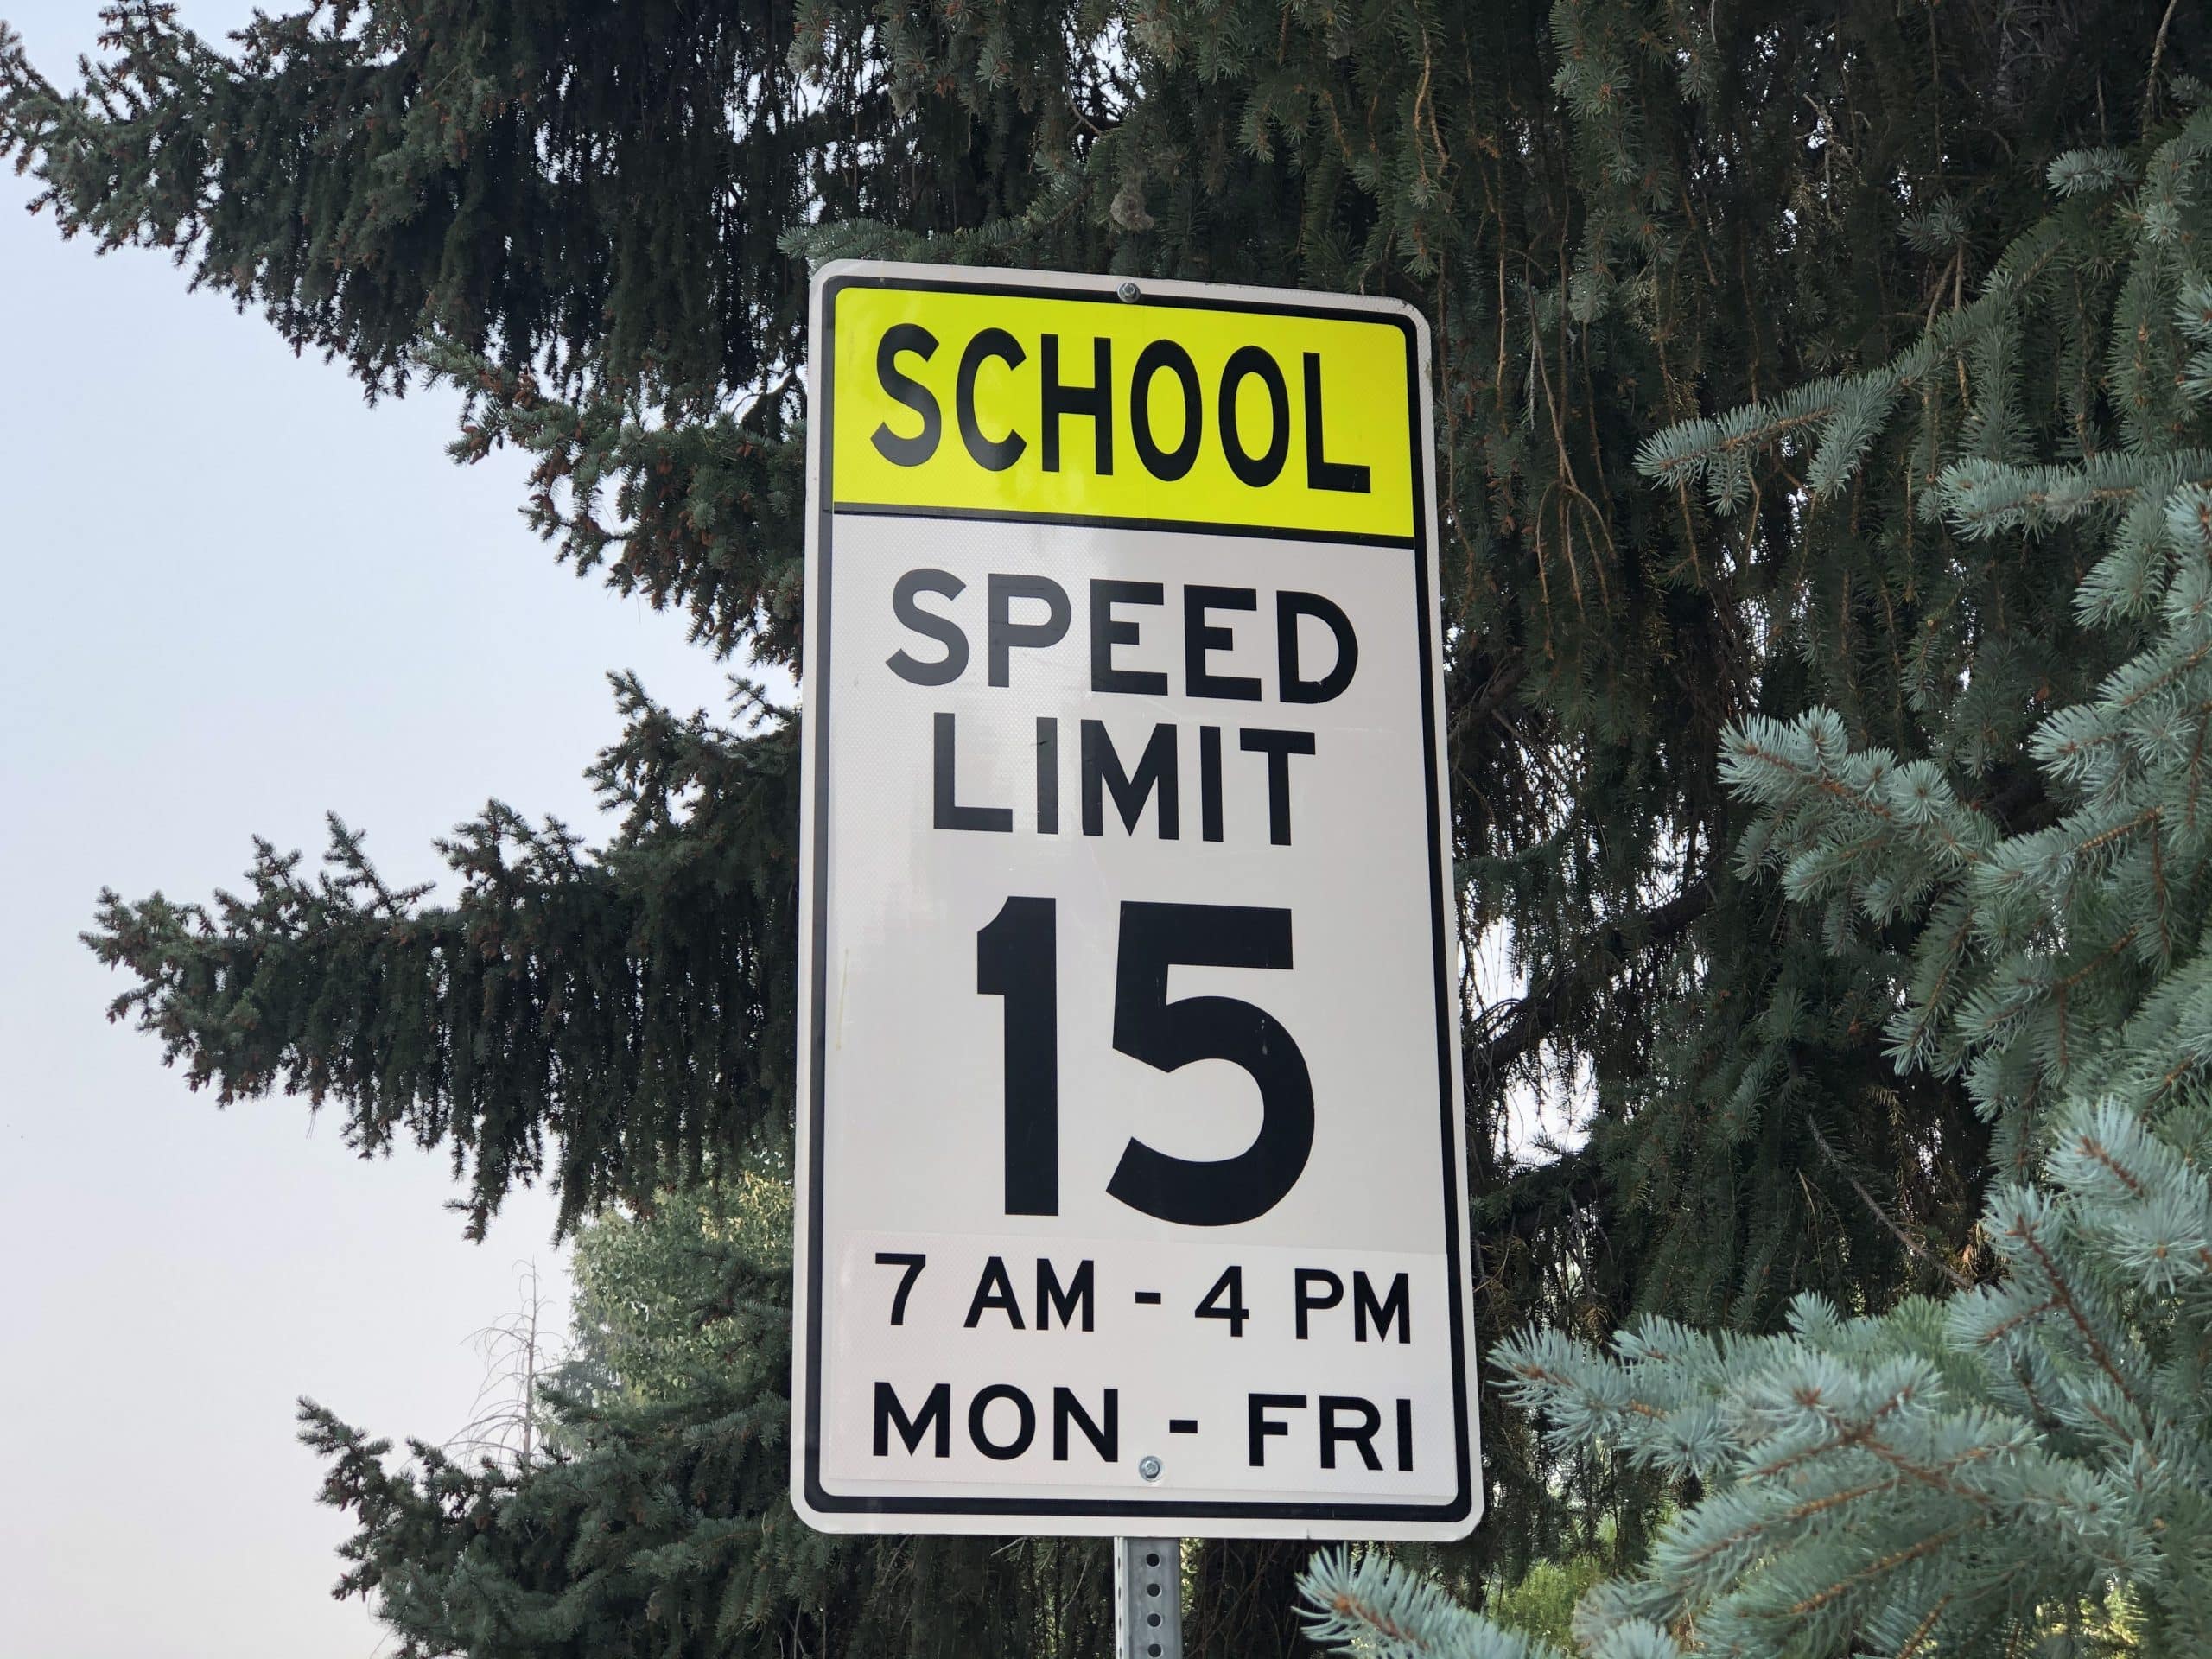 carson-city-extends-hours-for-15-mph-limit-in-school-zones-serving